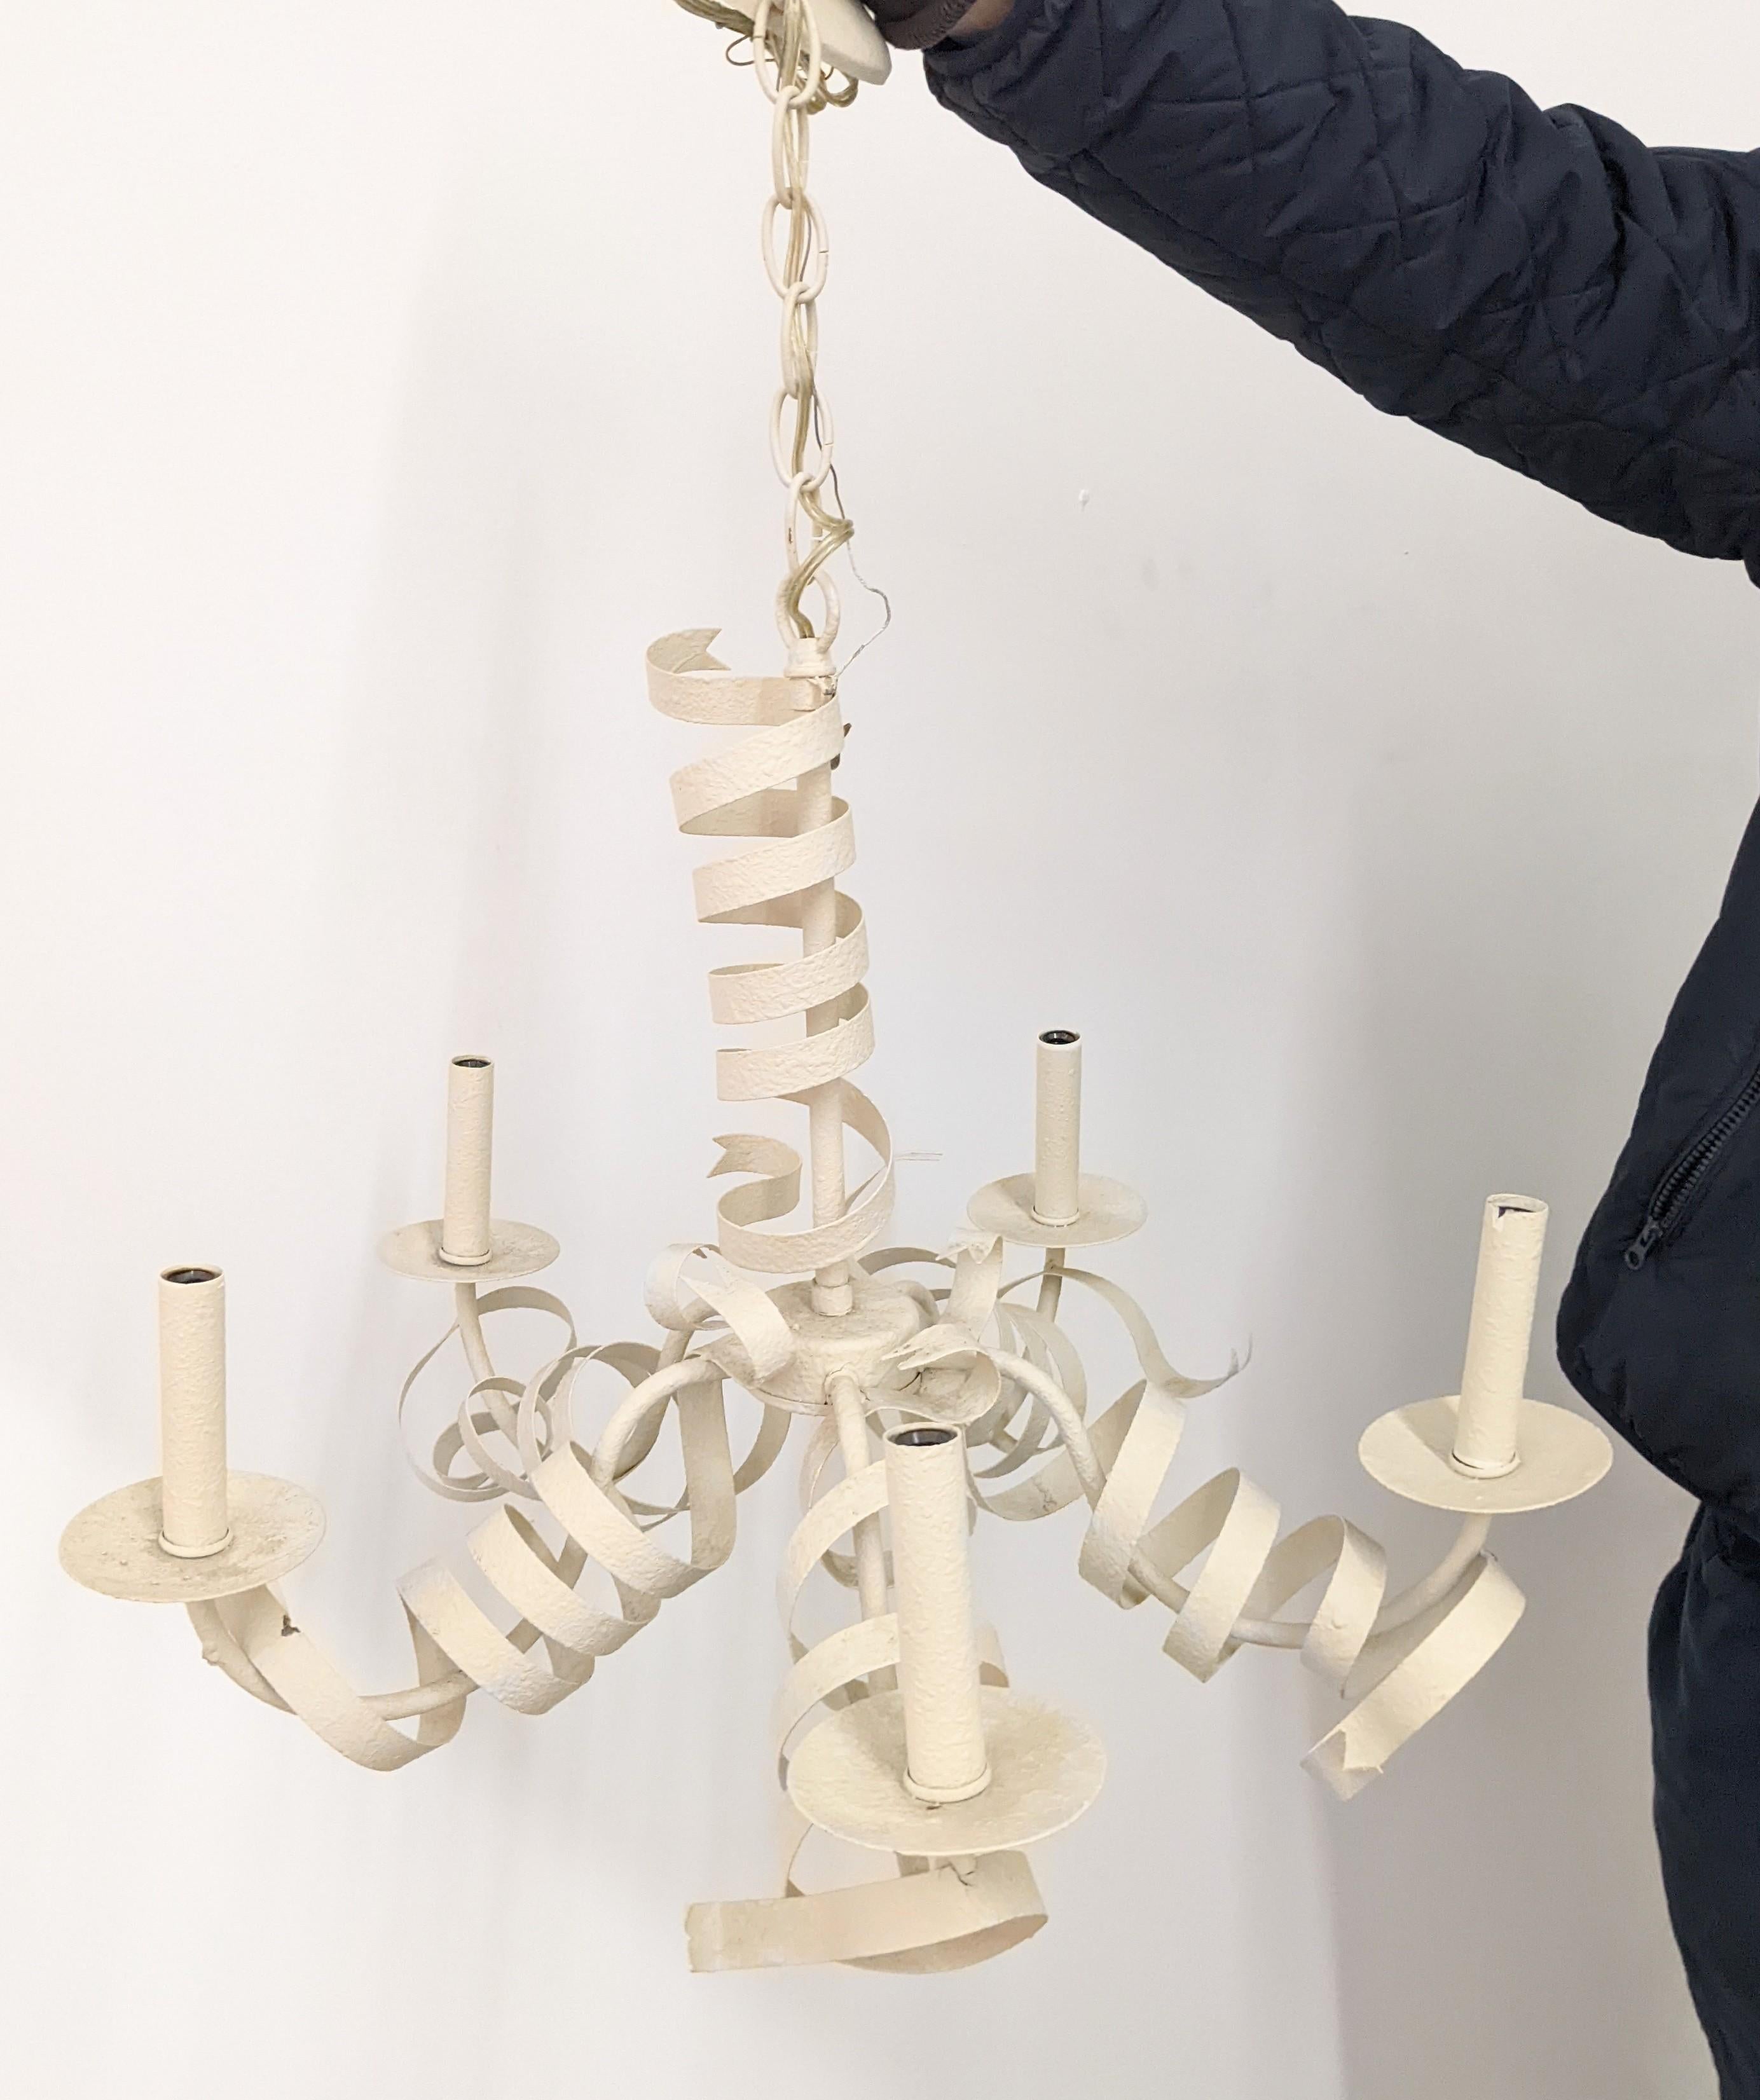 Charming painted metal chandelier in the Surrealist style with spirals of metal ribbons wrapped around the fixture. Finish is a pebbly enamel in a chalky ivory white. 
Measure: Width 23